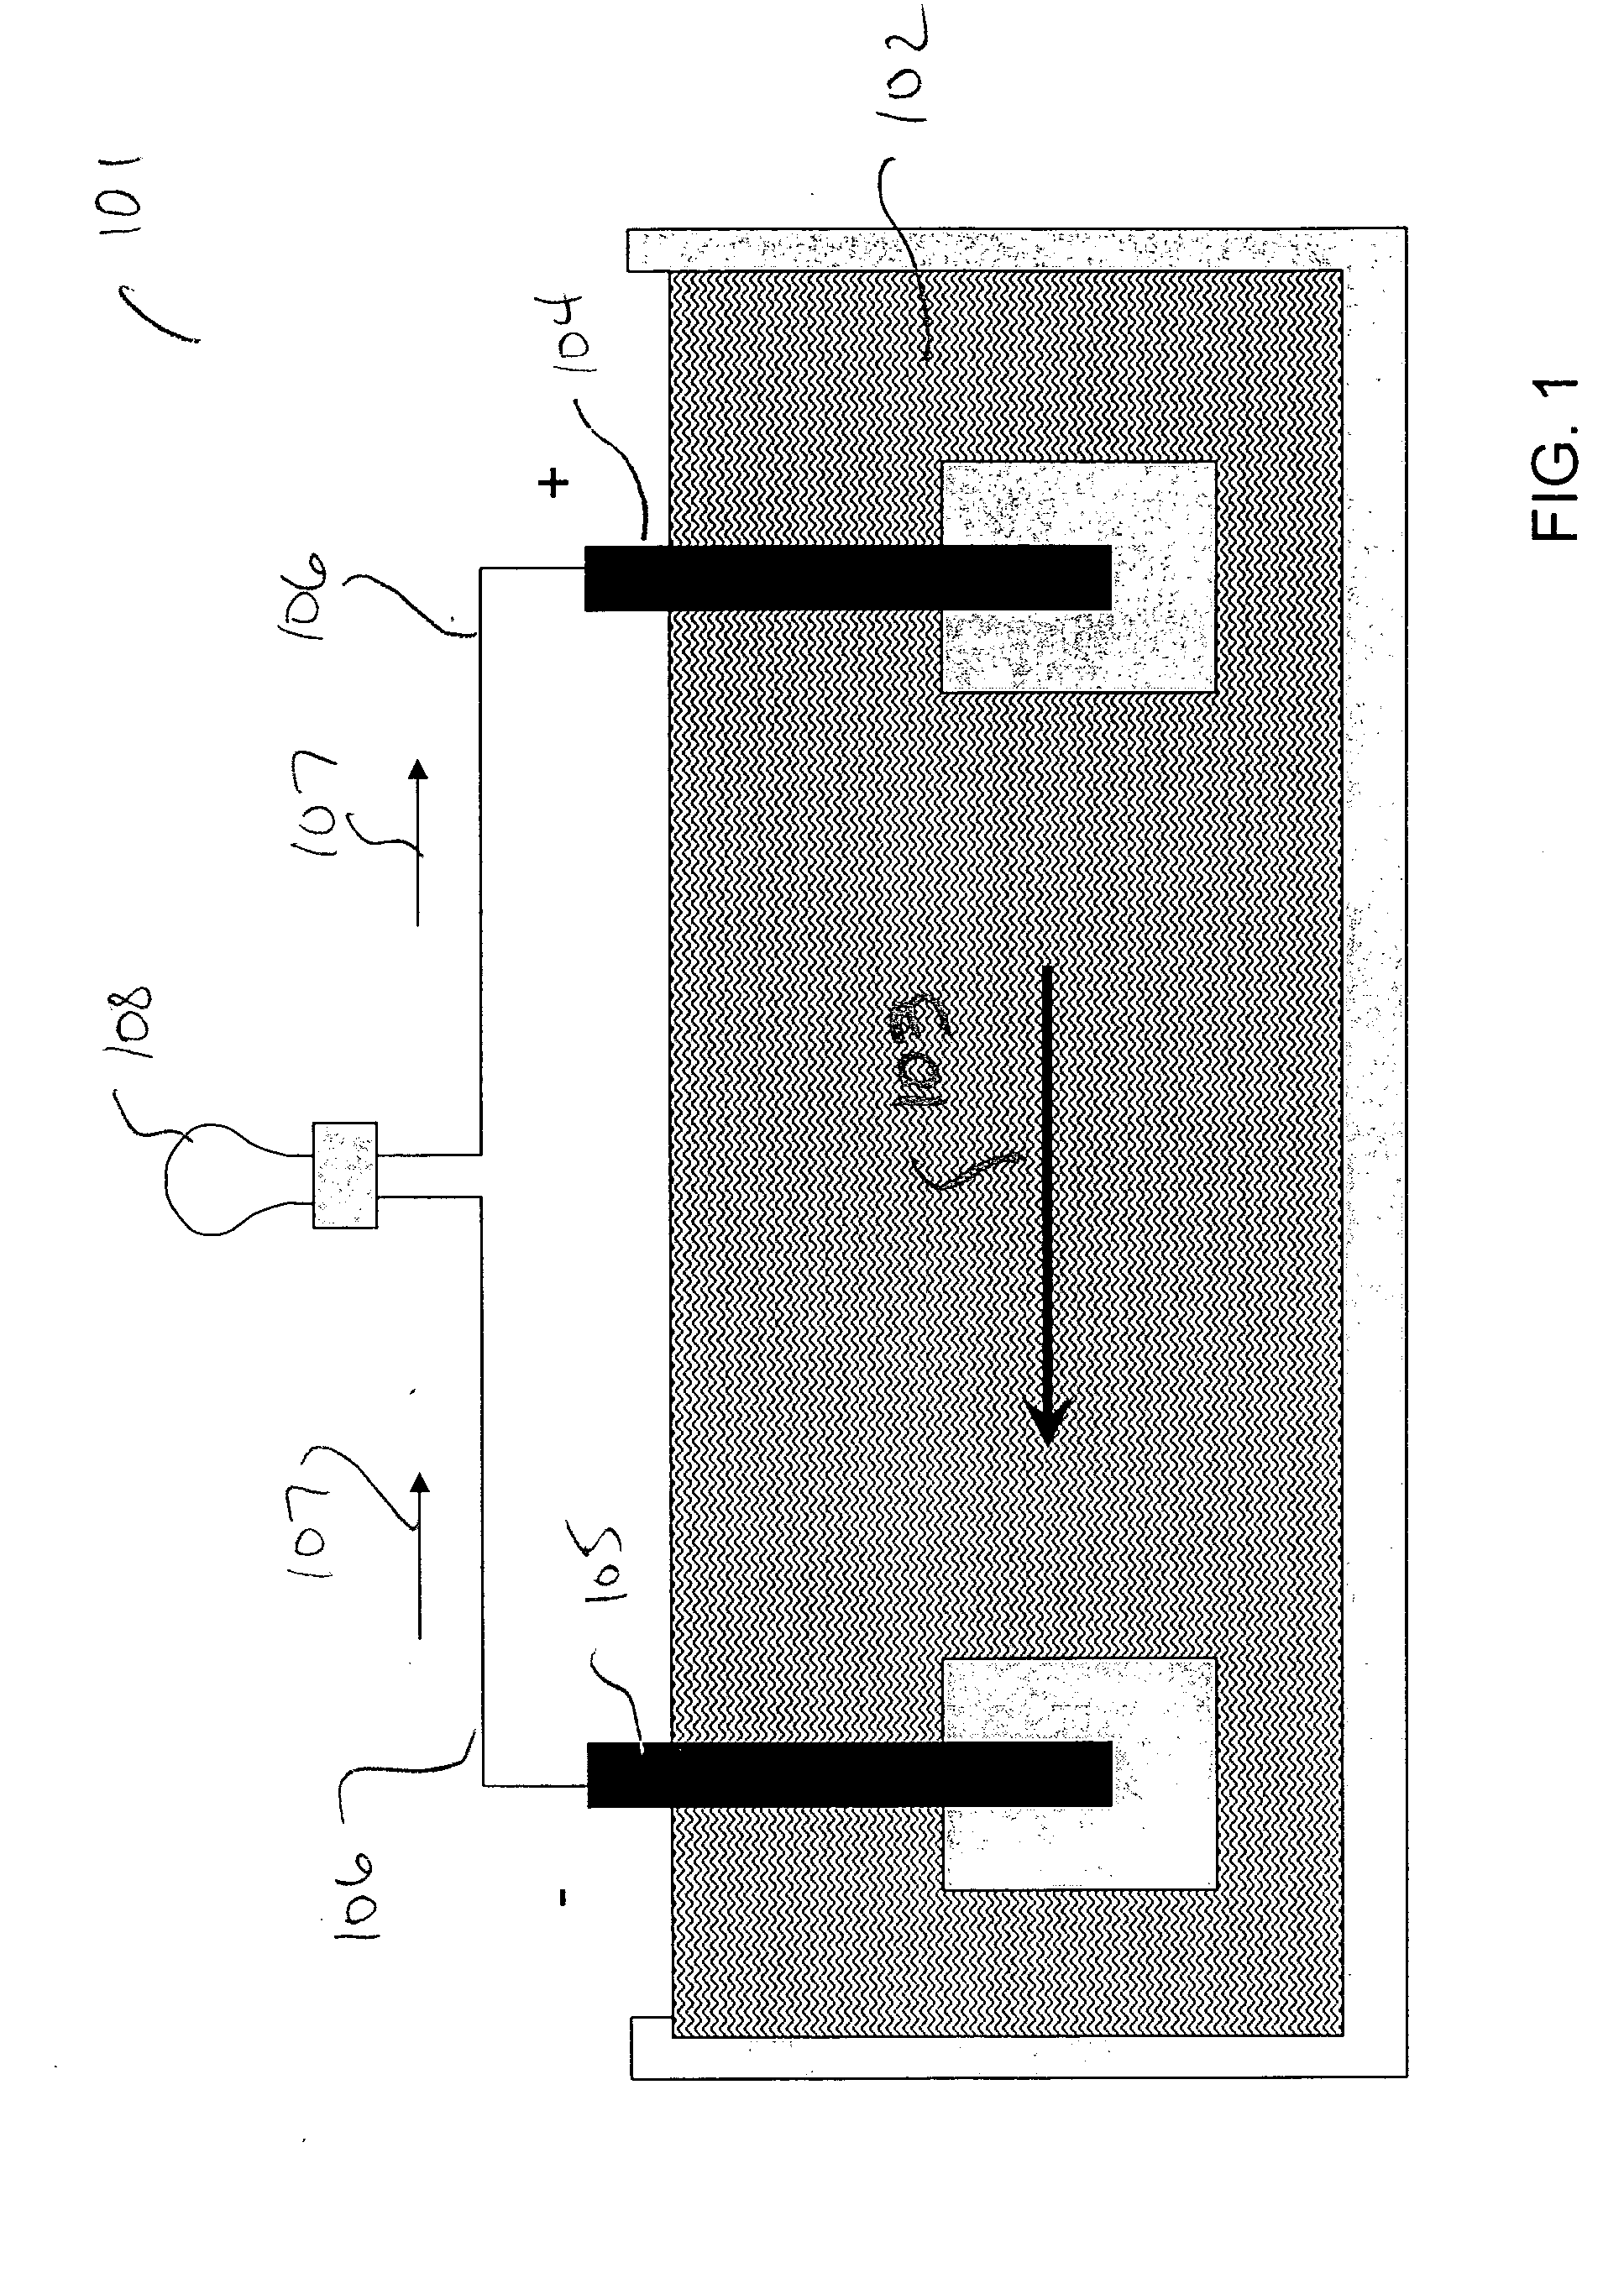 Electrowetting battery having a nanostructured electrode surface